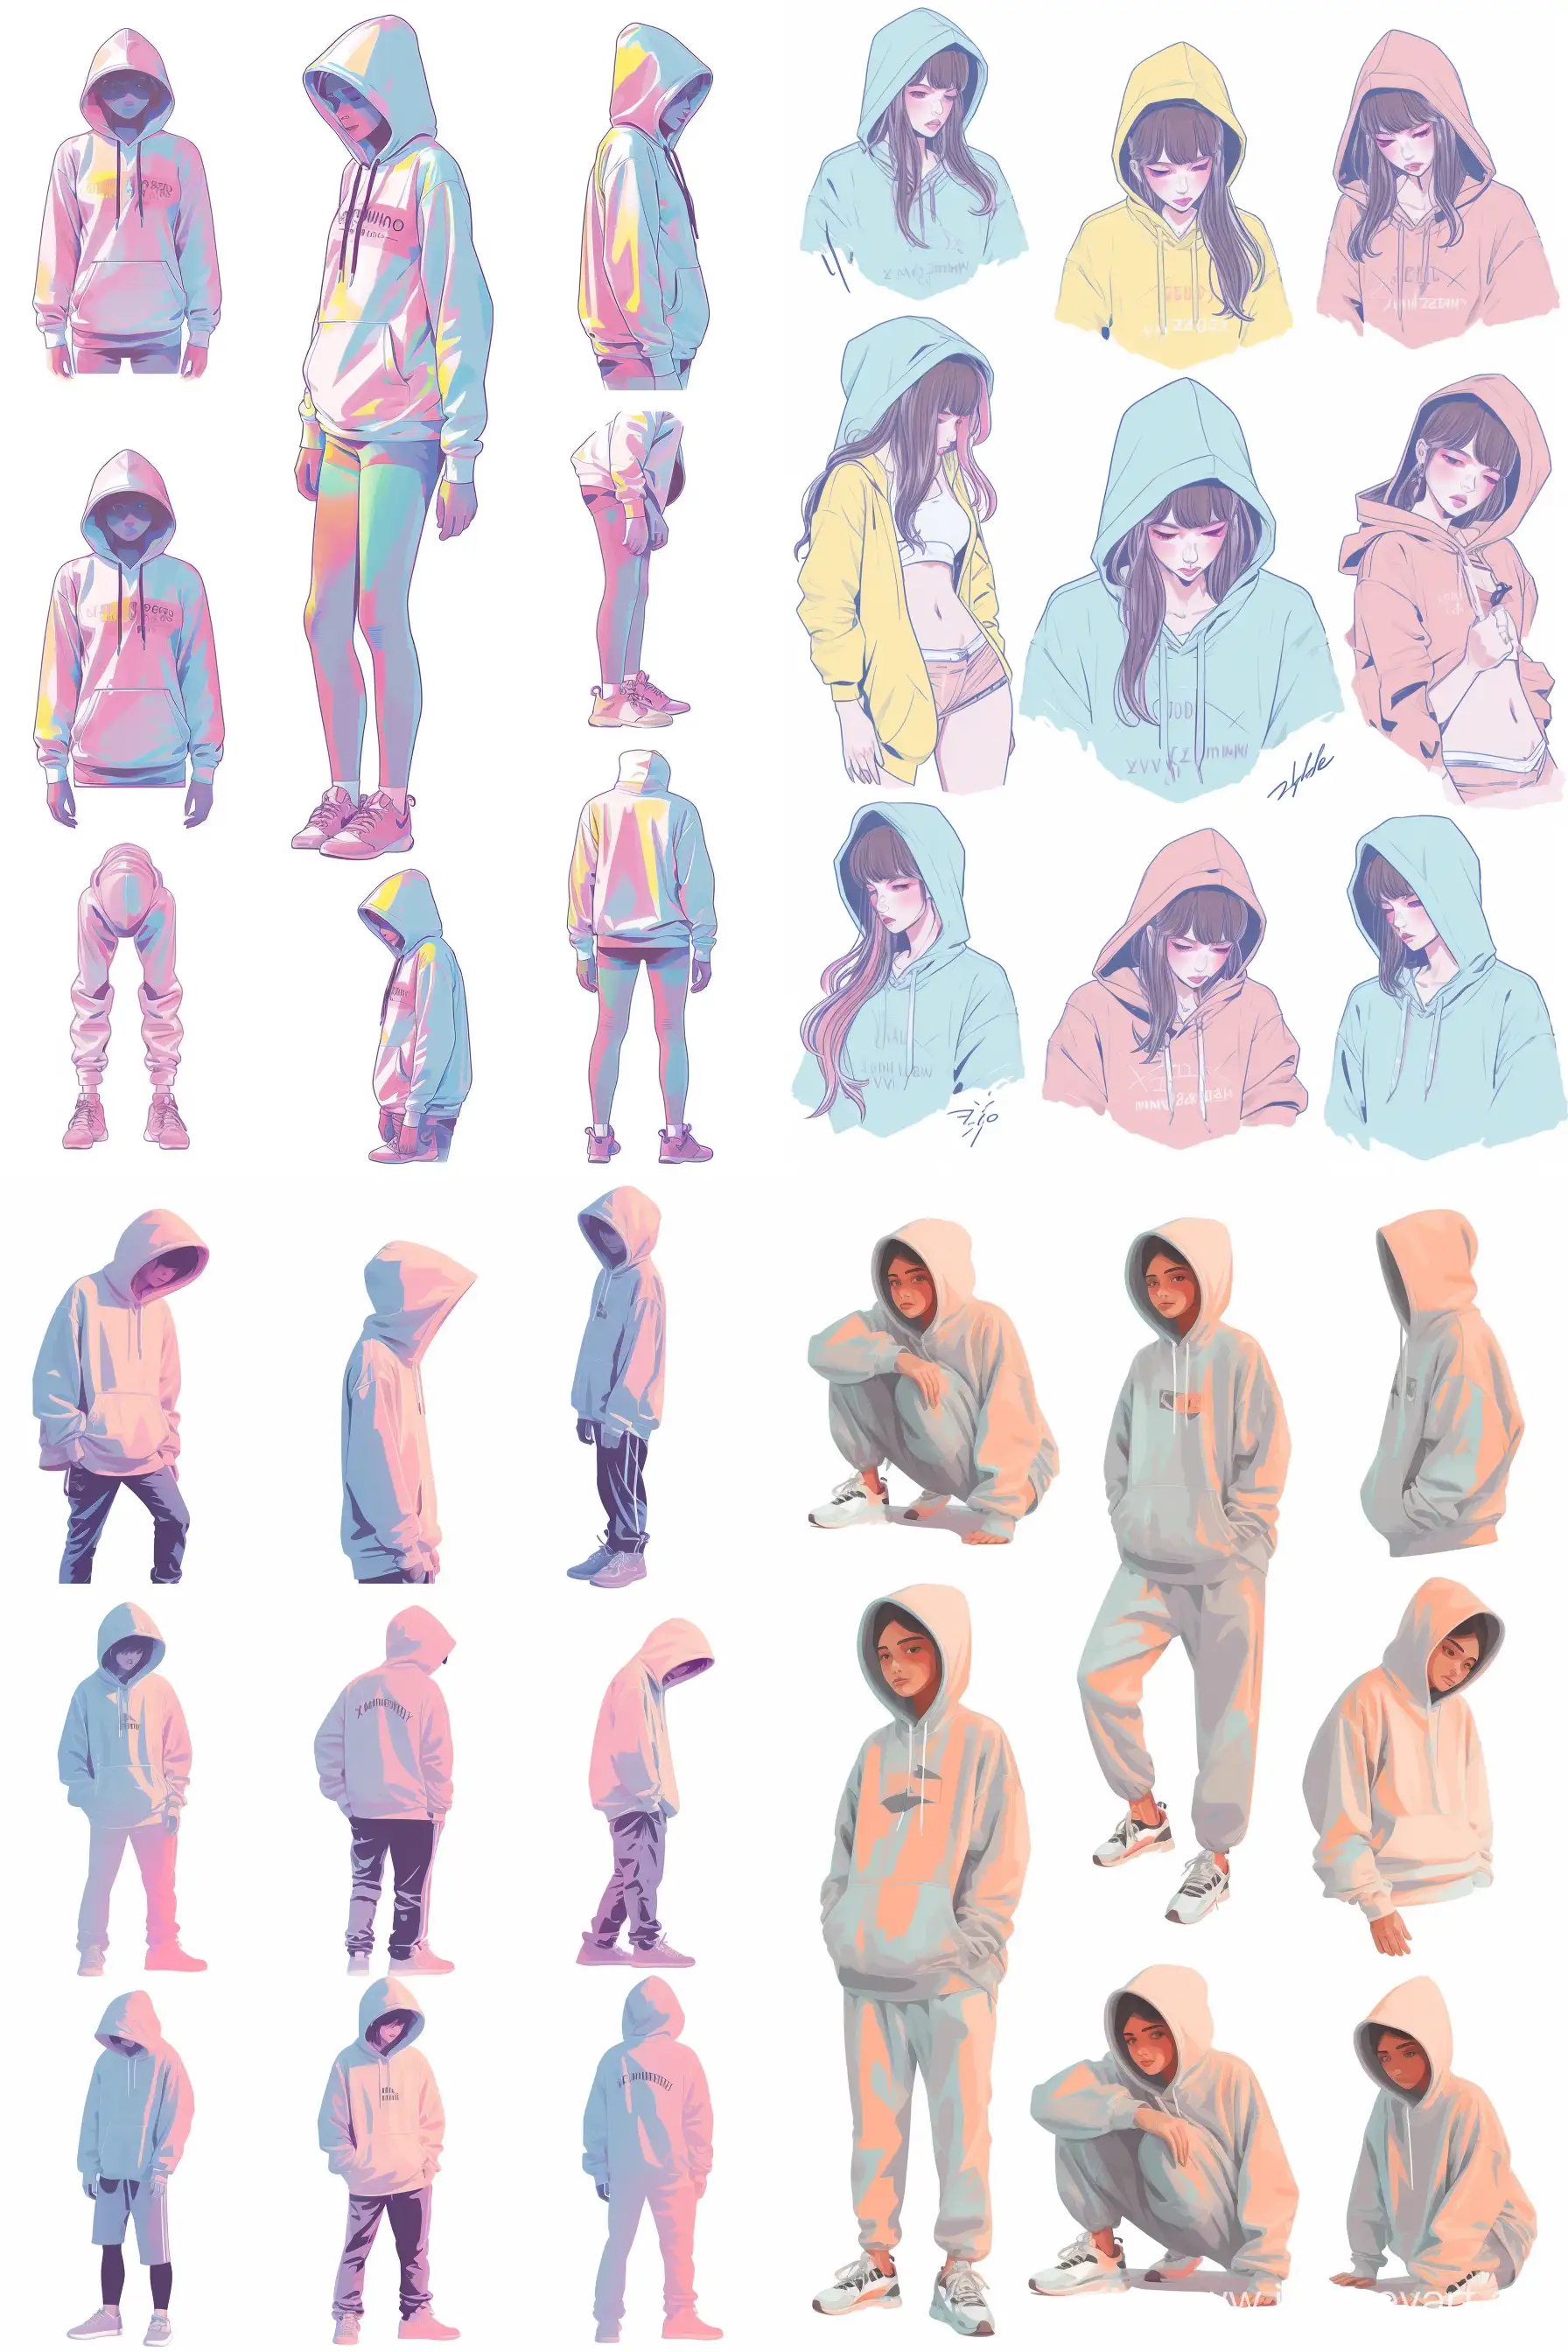 Fashionable-Hoodie-Poses-in-Retro-Anime-Style